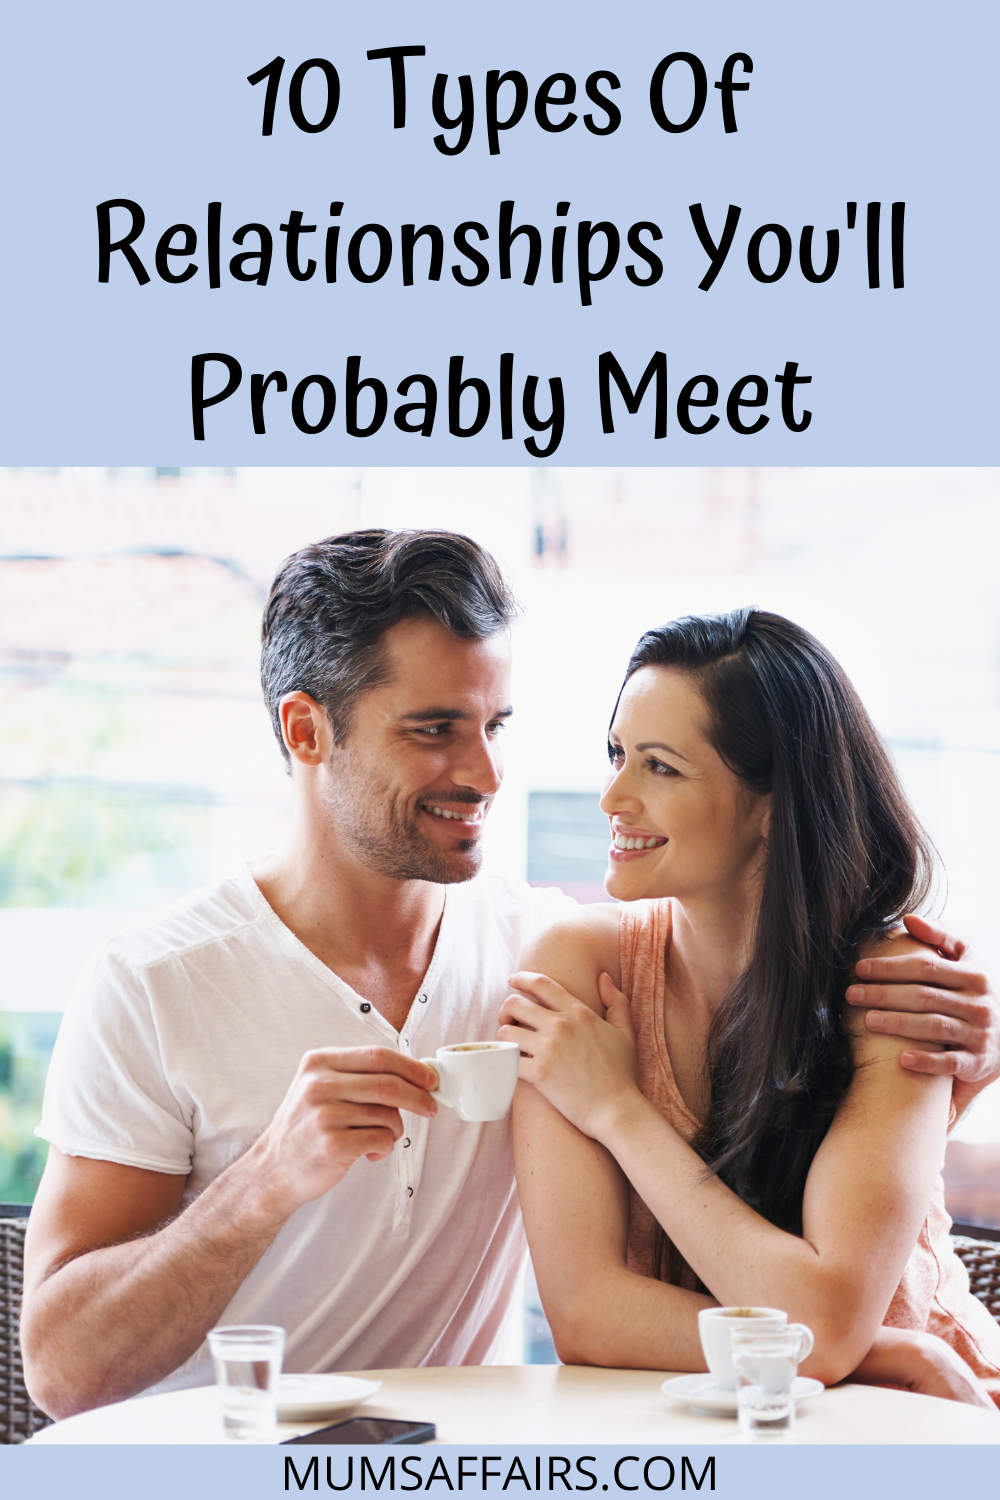 10 Types Of Relationships You'll Probably Meet